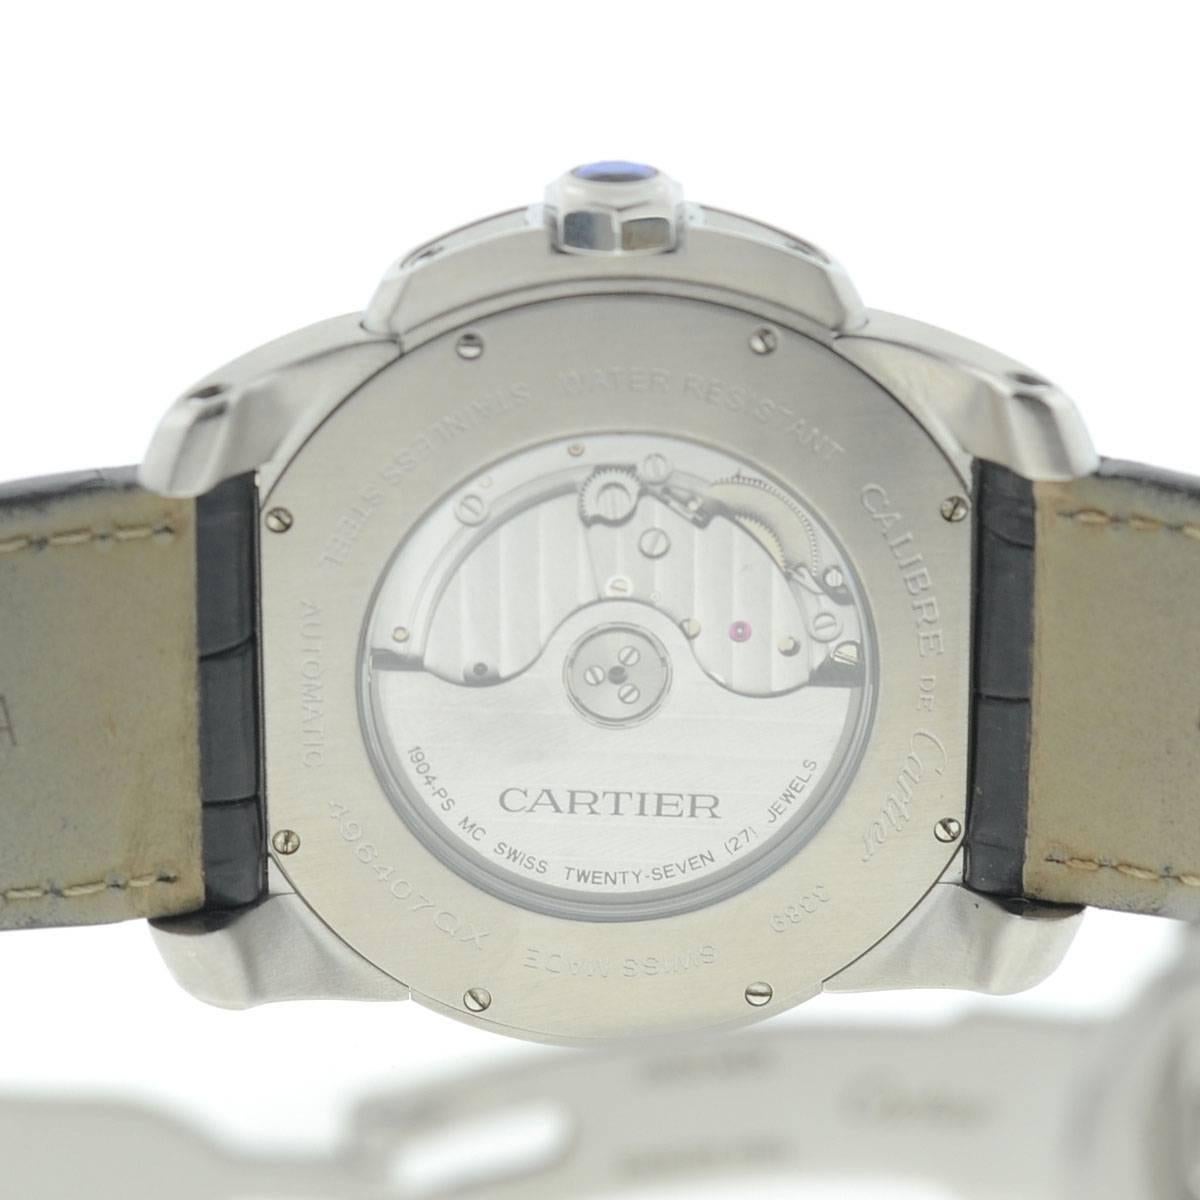 Cartier Stainless Steel Calibre Automatic Wristwatch 5